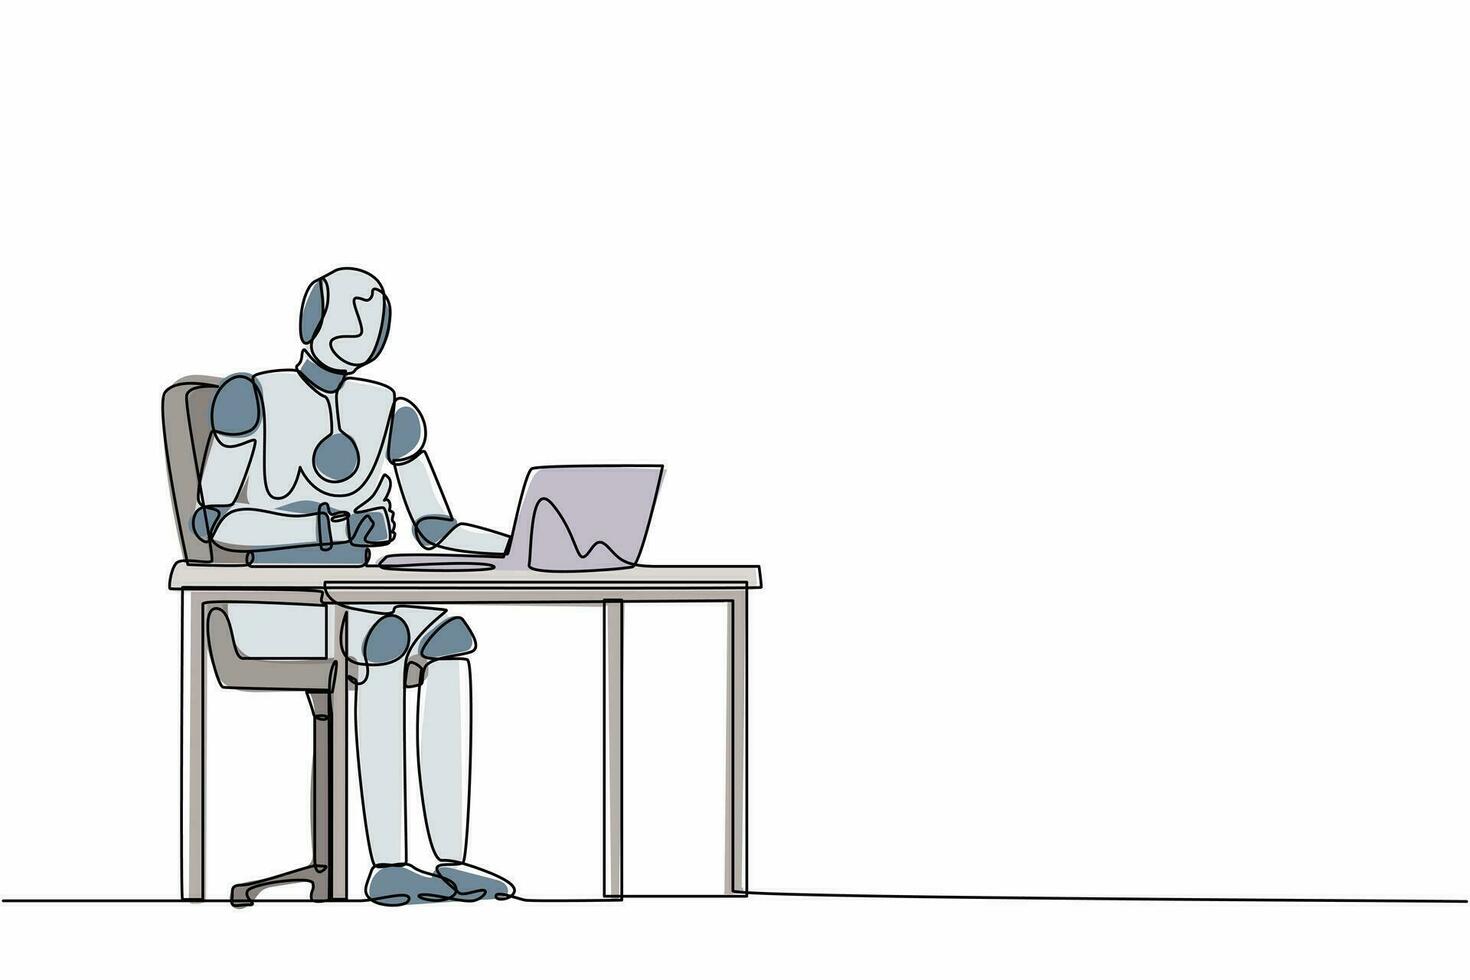 Continuous one line drawing robot giving thumbs up sign in front of computer. Humanoid robot cybernetic organism. Future robotics development concept. Single line design vector graphic illustration